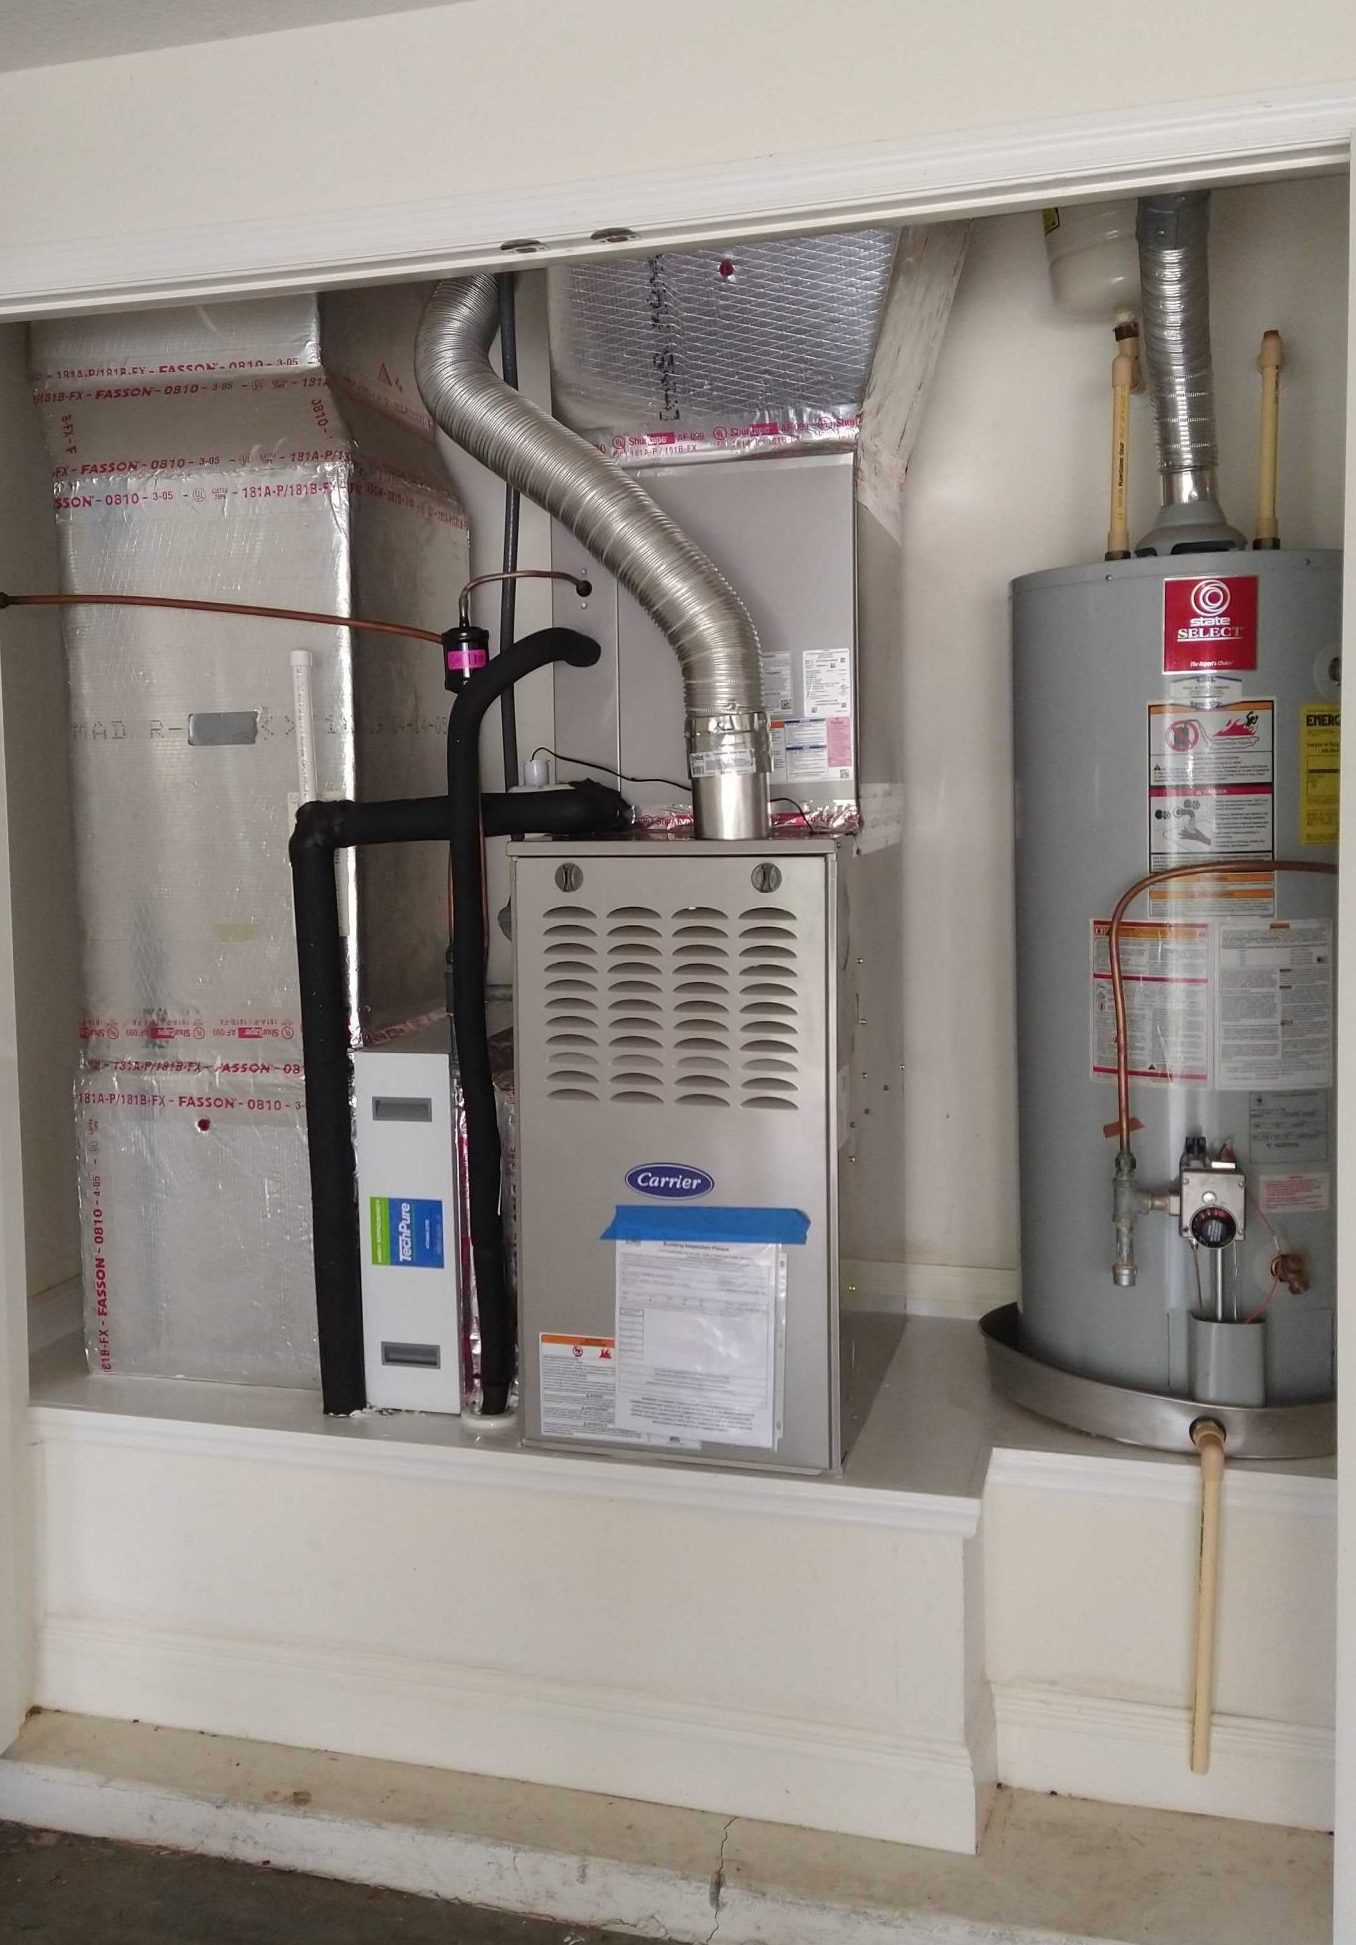 a furnace and water heater, two common sources of carbon monoxide